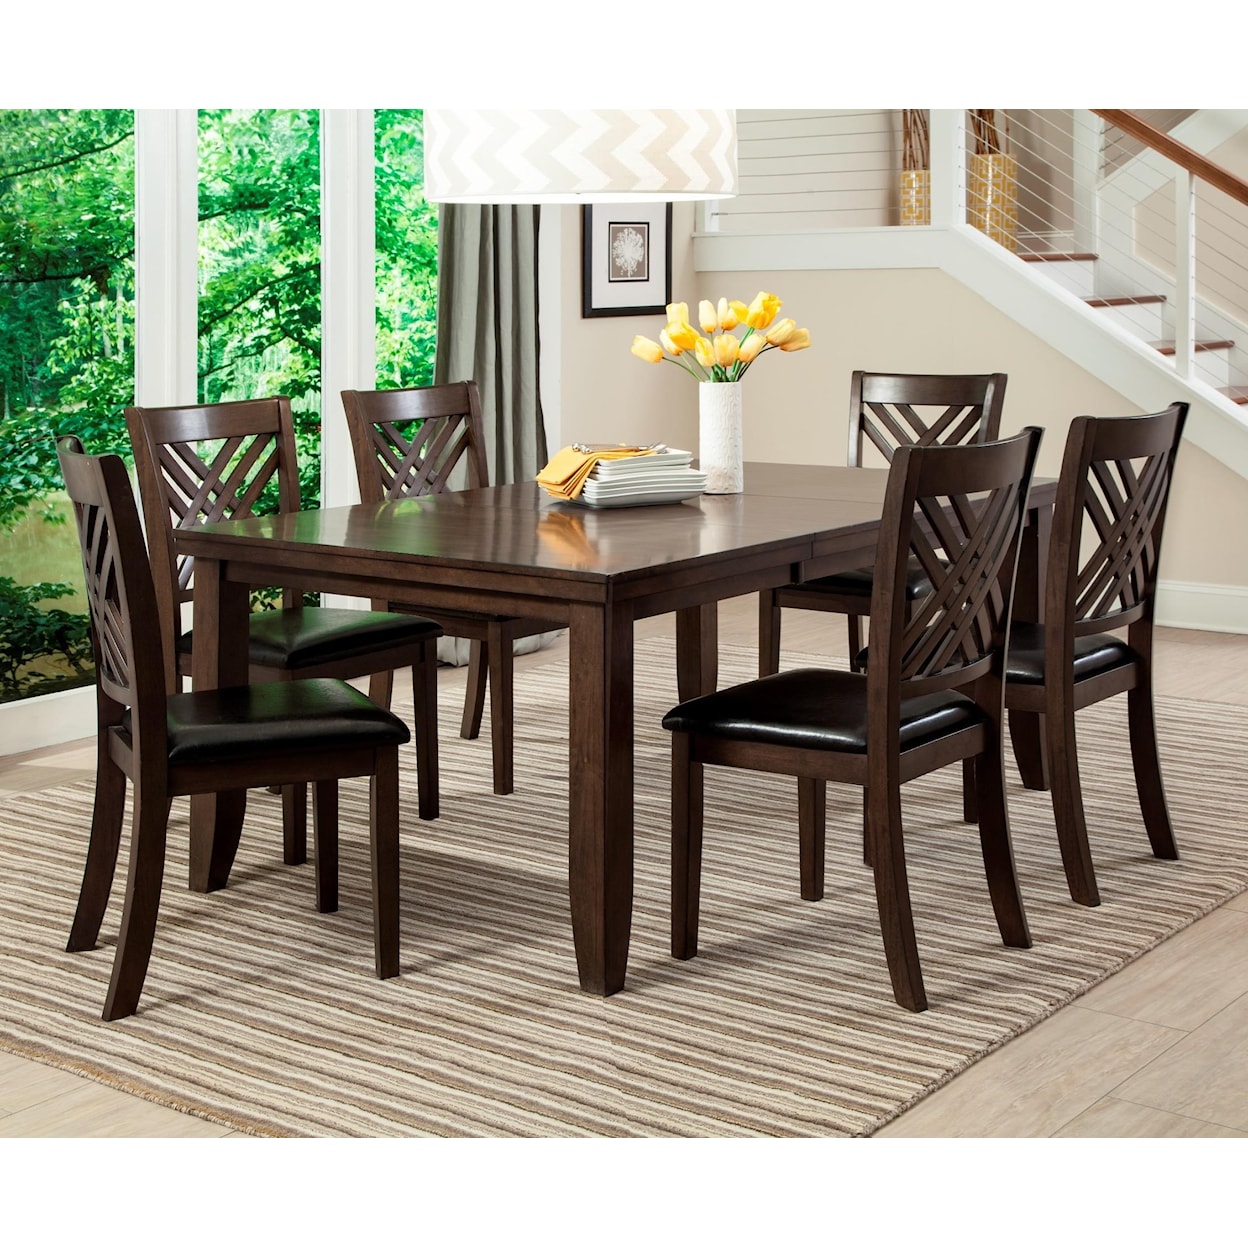 Lifestyle Cassidy 7 Piece Table & Chair Set